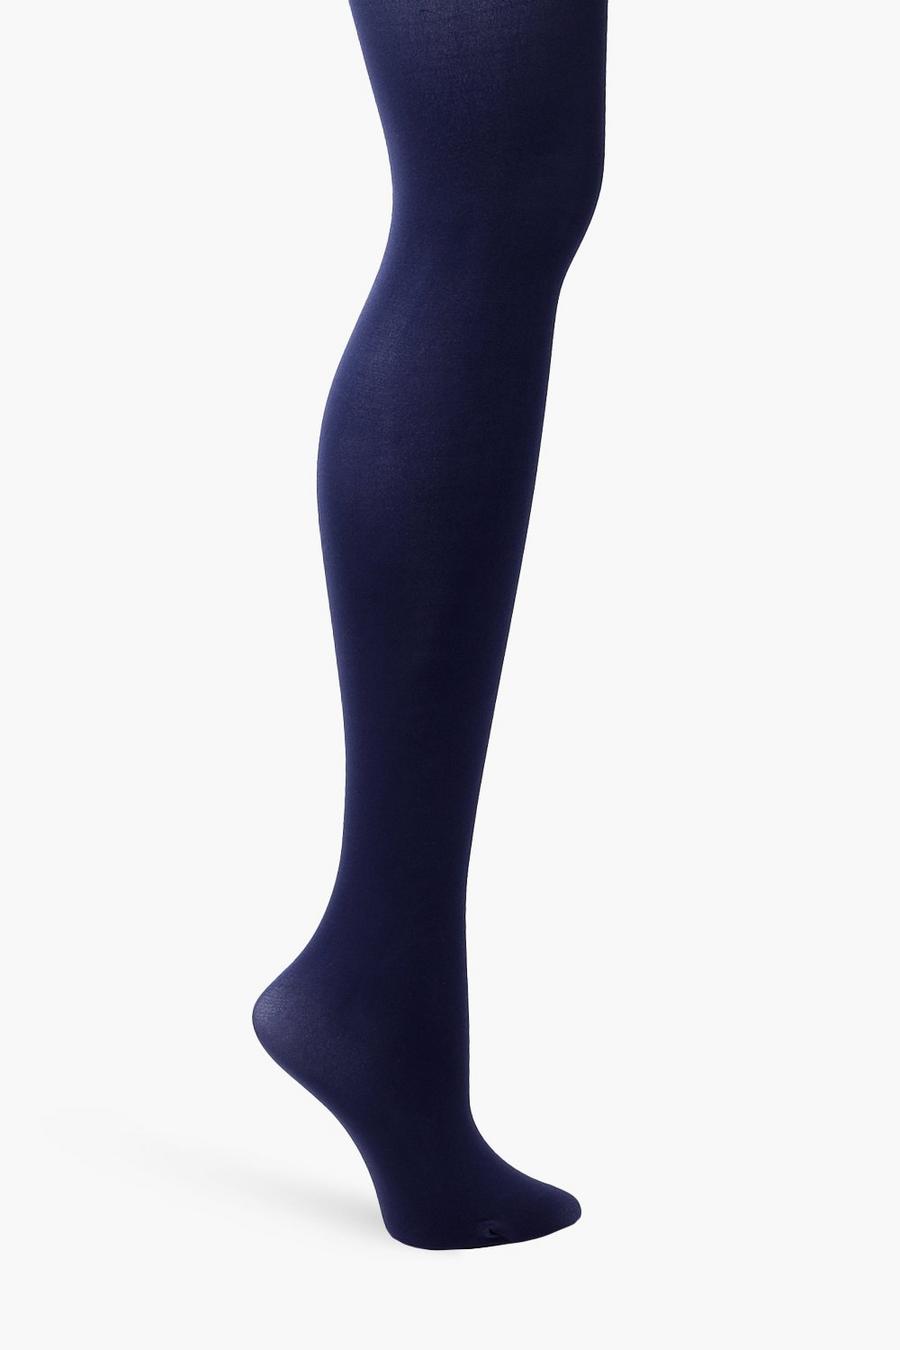 Grande taille - Collants opaques 60 deniers, Navy image number 1